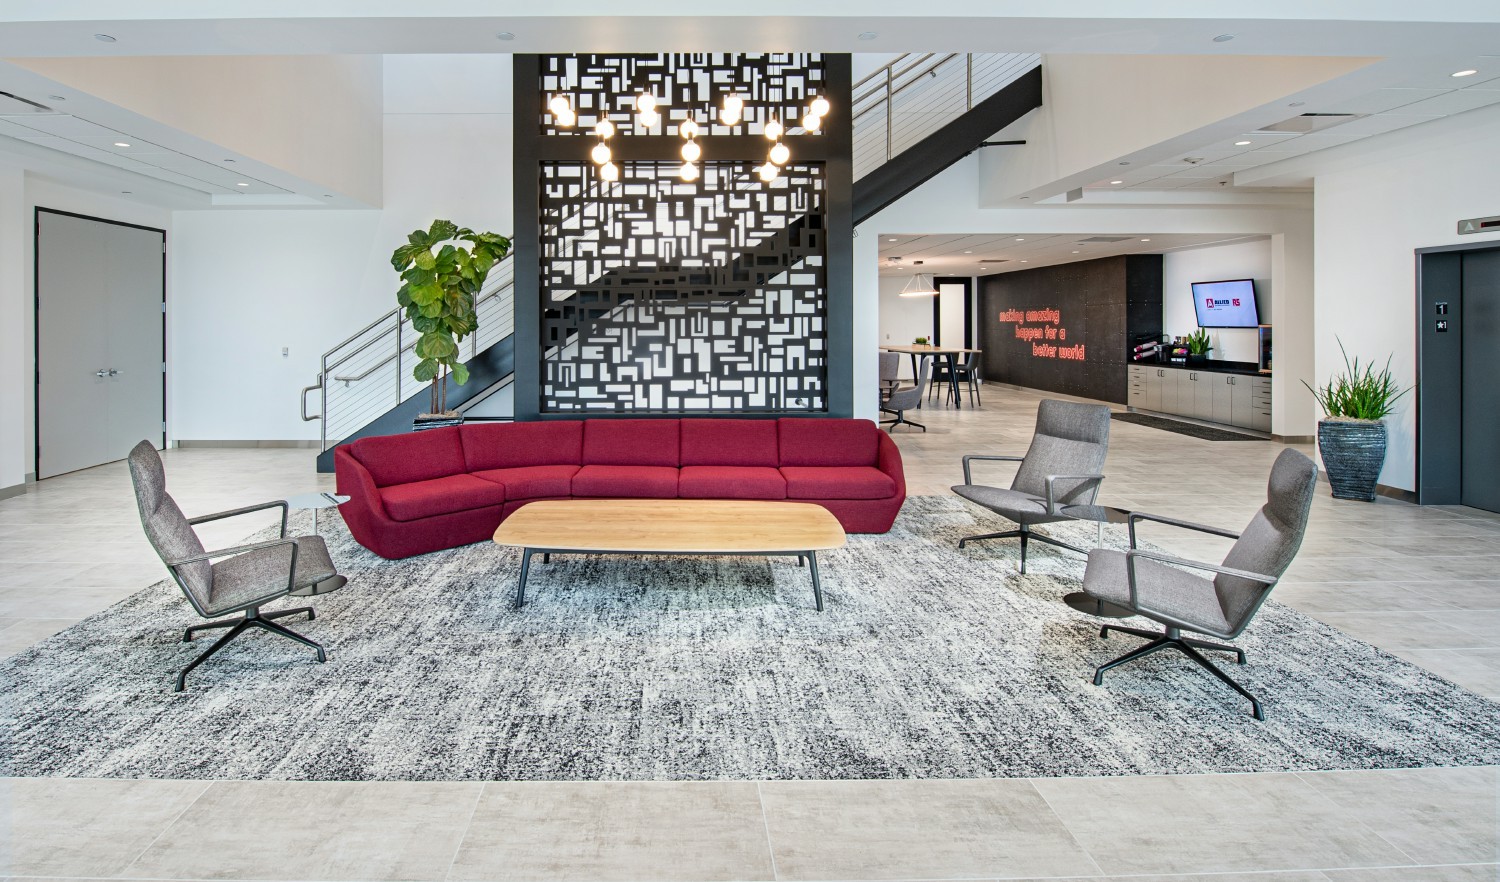 Main lobby at our newly renovated offices at Allied